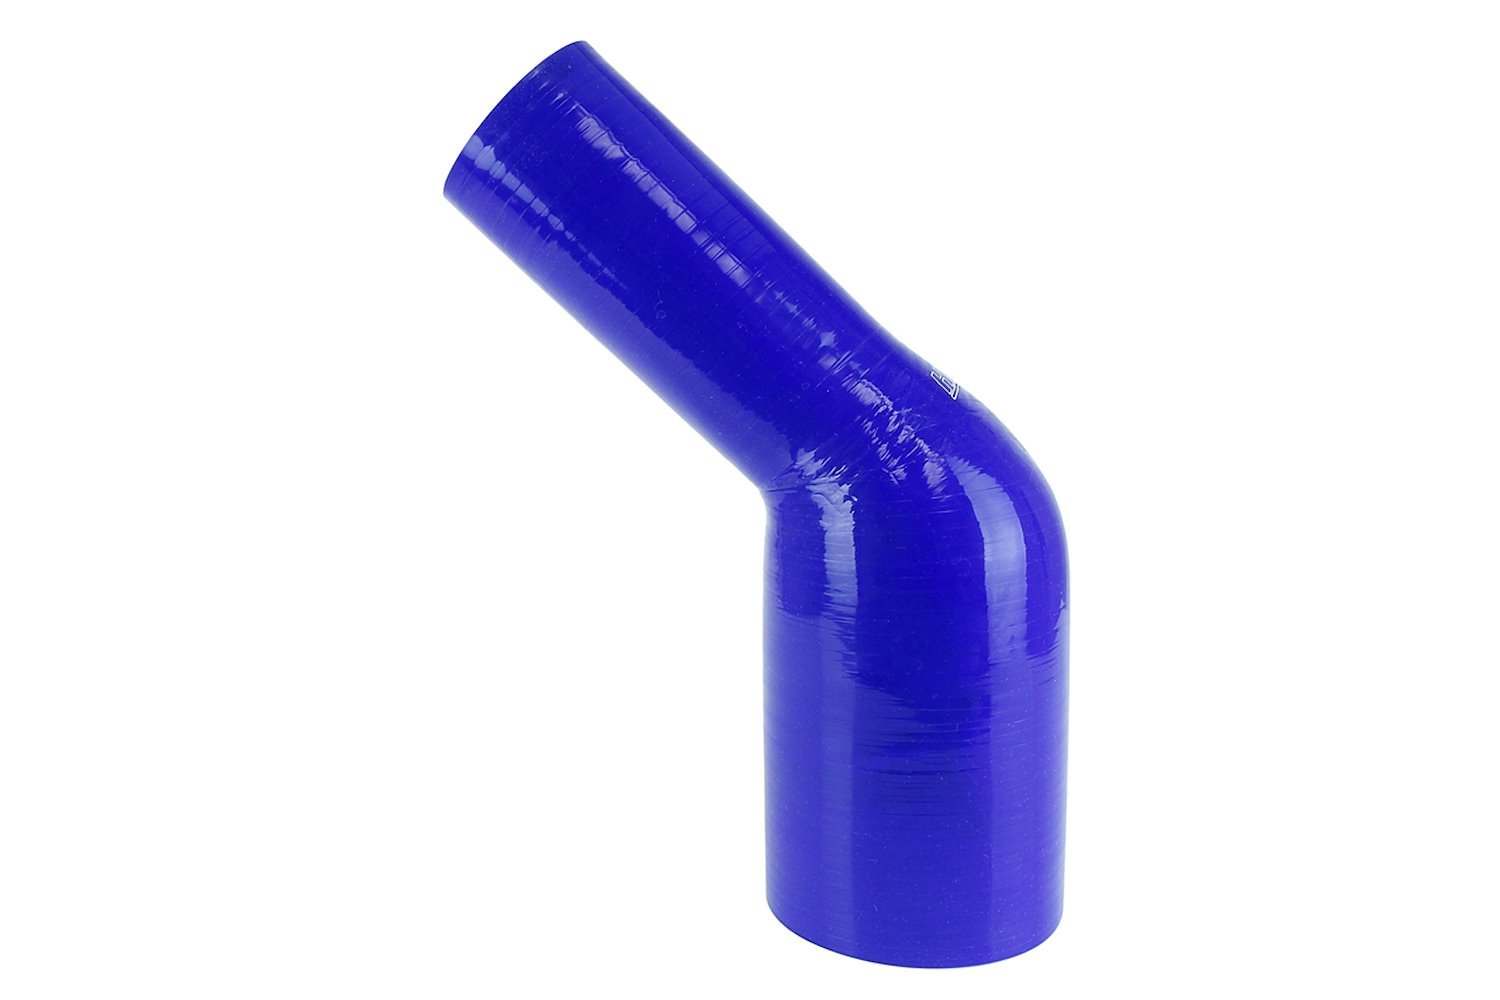 HTSER45-200-250-BLUE Silicone 45-Degree Elbow Hose, High-Temp 4-Ply Reinforced, 2 in. - 2-1/2 in. ID, Blue